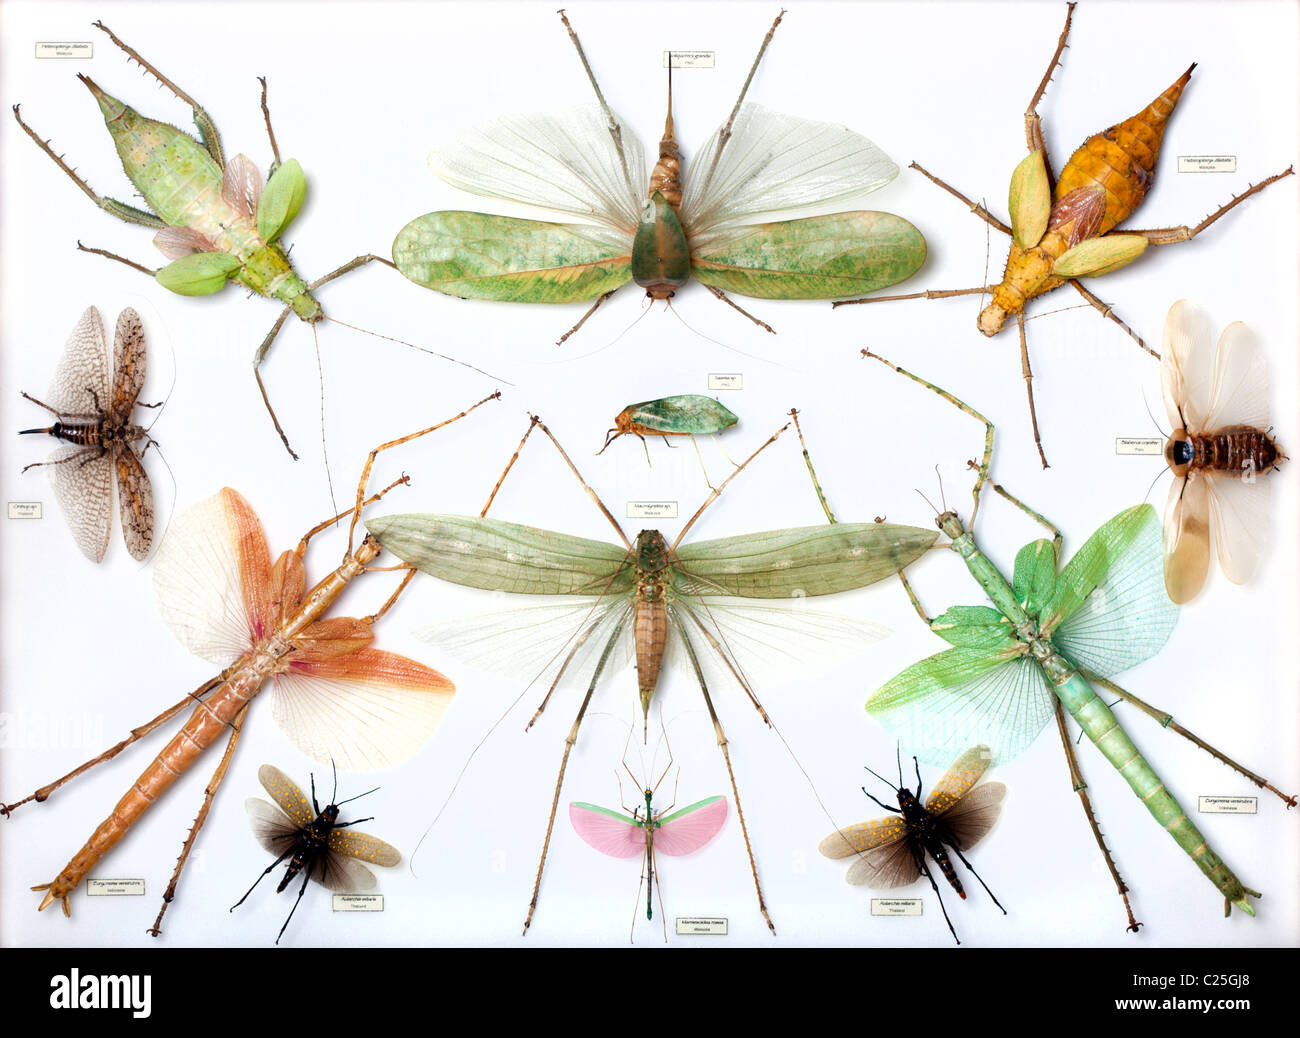 Collection of walkingsticks and grasshoppers Stock Photo